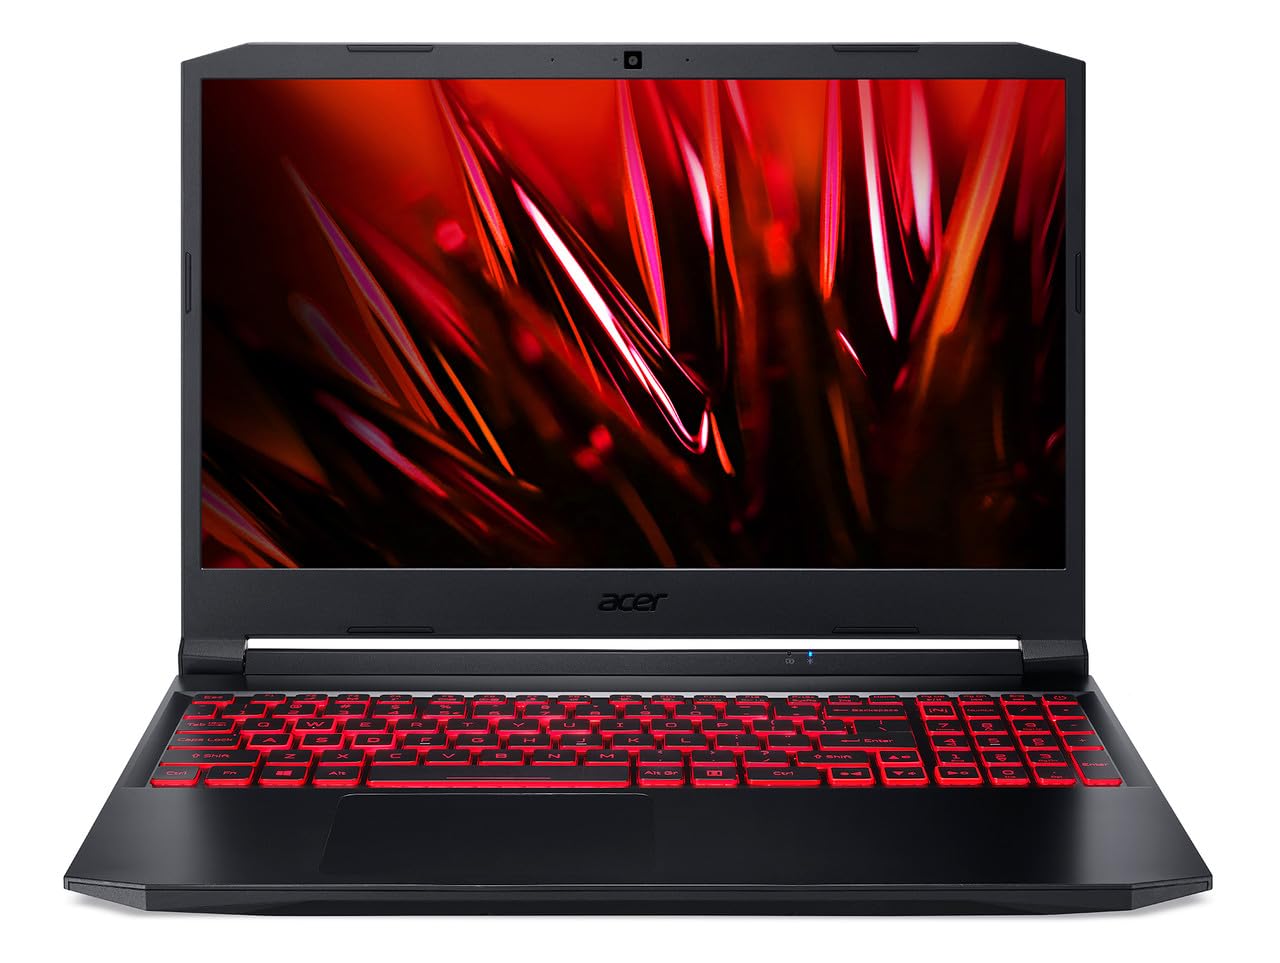 acer Nitro 5 AN515-57 Gaming & Business Laptop (Intel i7-11800H 8-Core, 64GB RAM, 128GB PCIe SSD + 500GB HDD, GeForce RTX 3050 Ti, 15.6" 144Hz Win 10 Pro) with G2 Universal Dock